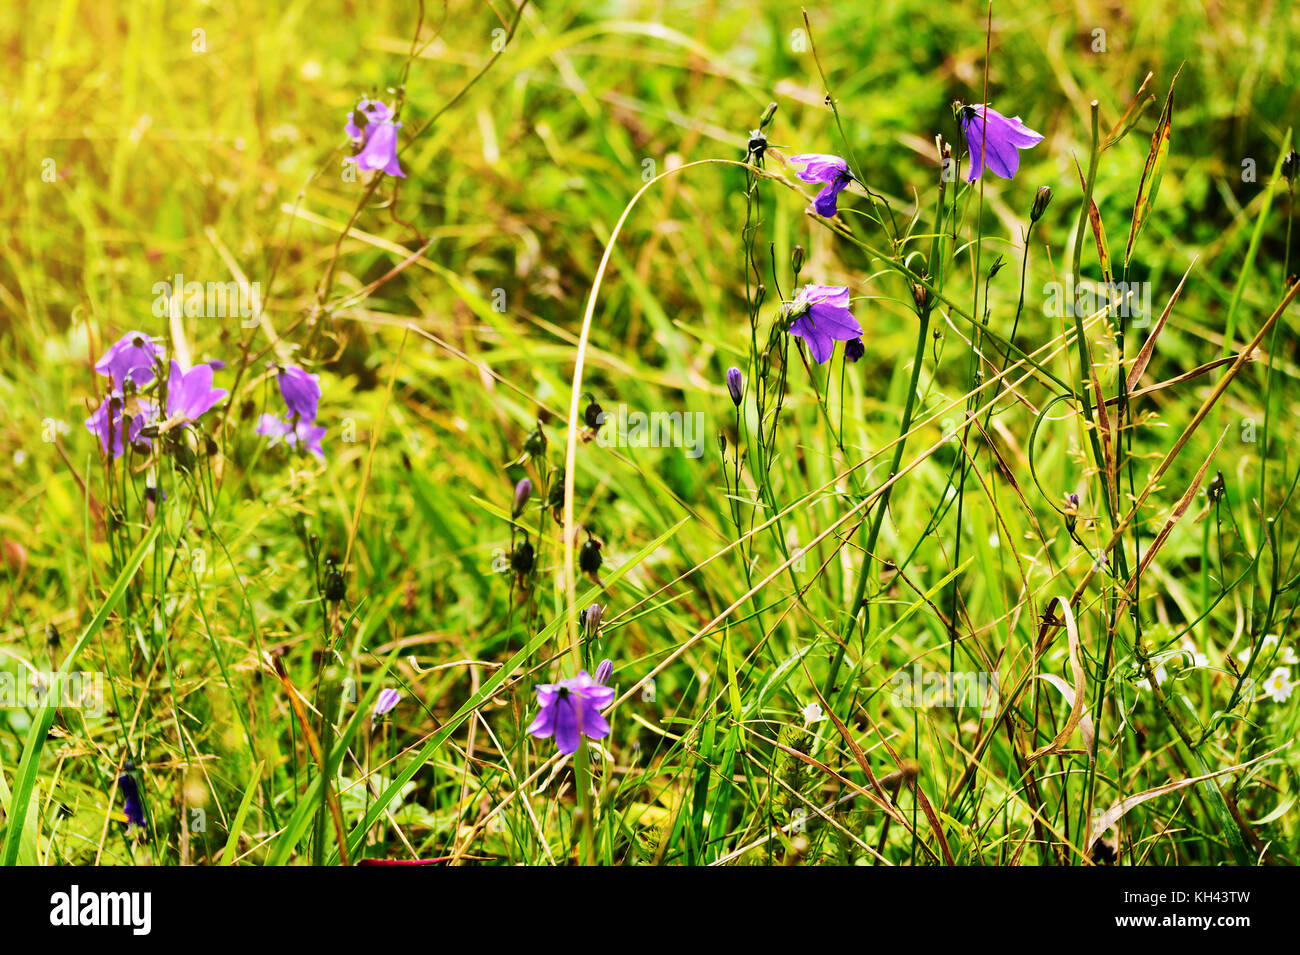 Violet harebell Campanula rotundifolia flowers growing on green romantic sunny meadow. Wildflowers in blossom on summer grassland. Sudetes, Poland. Stock Photo